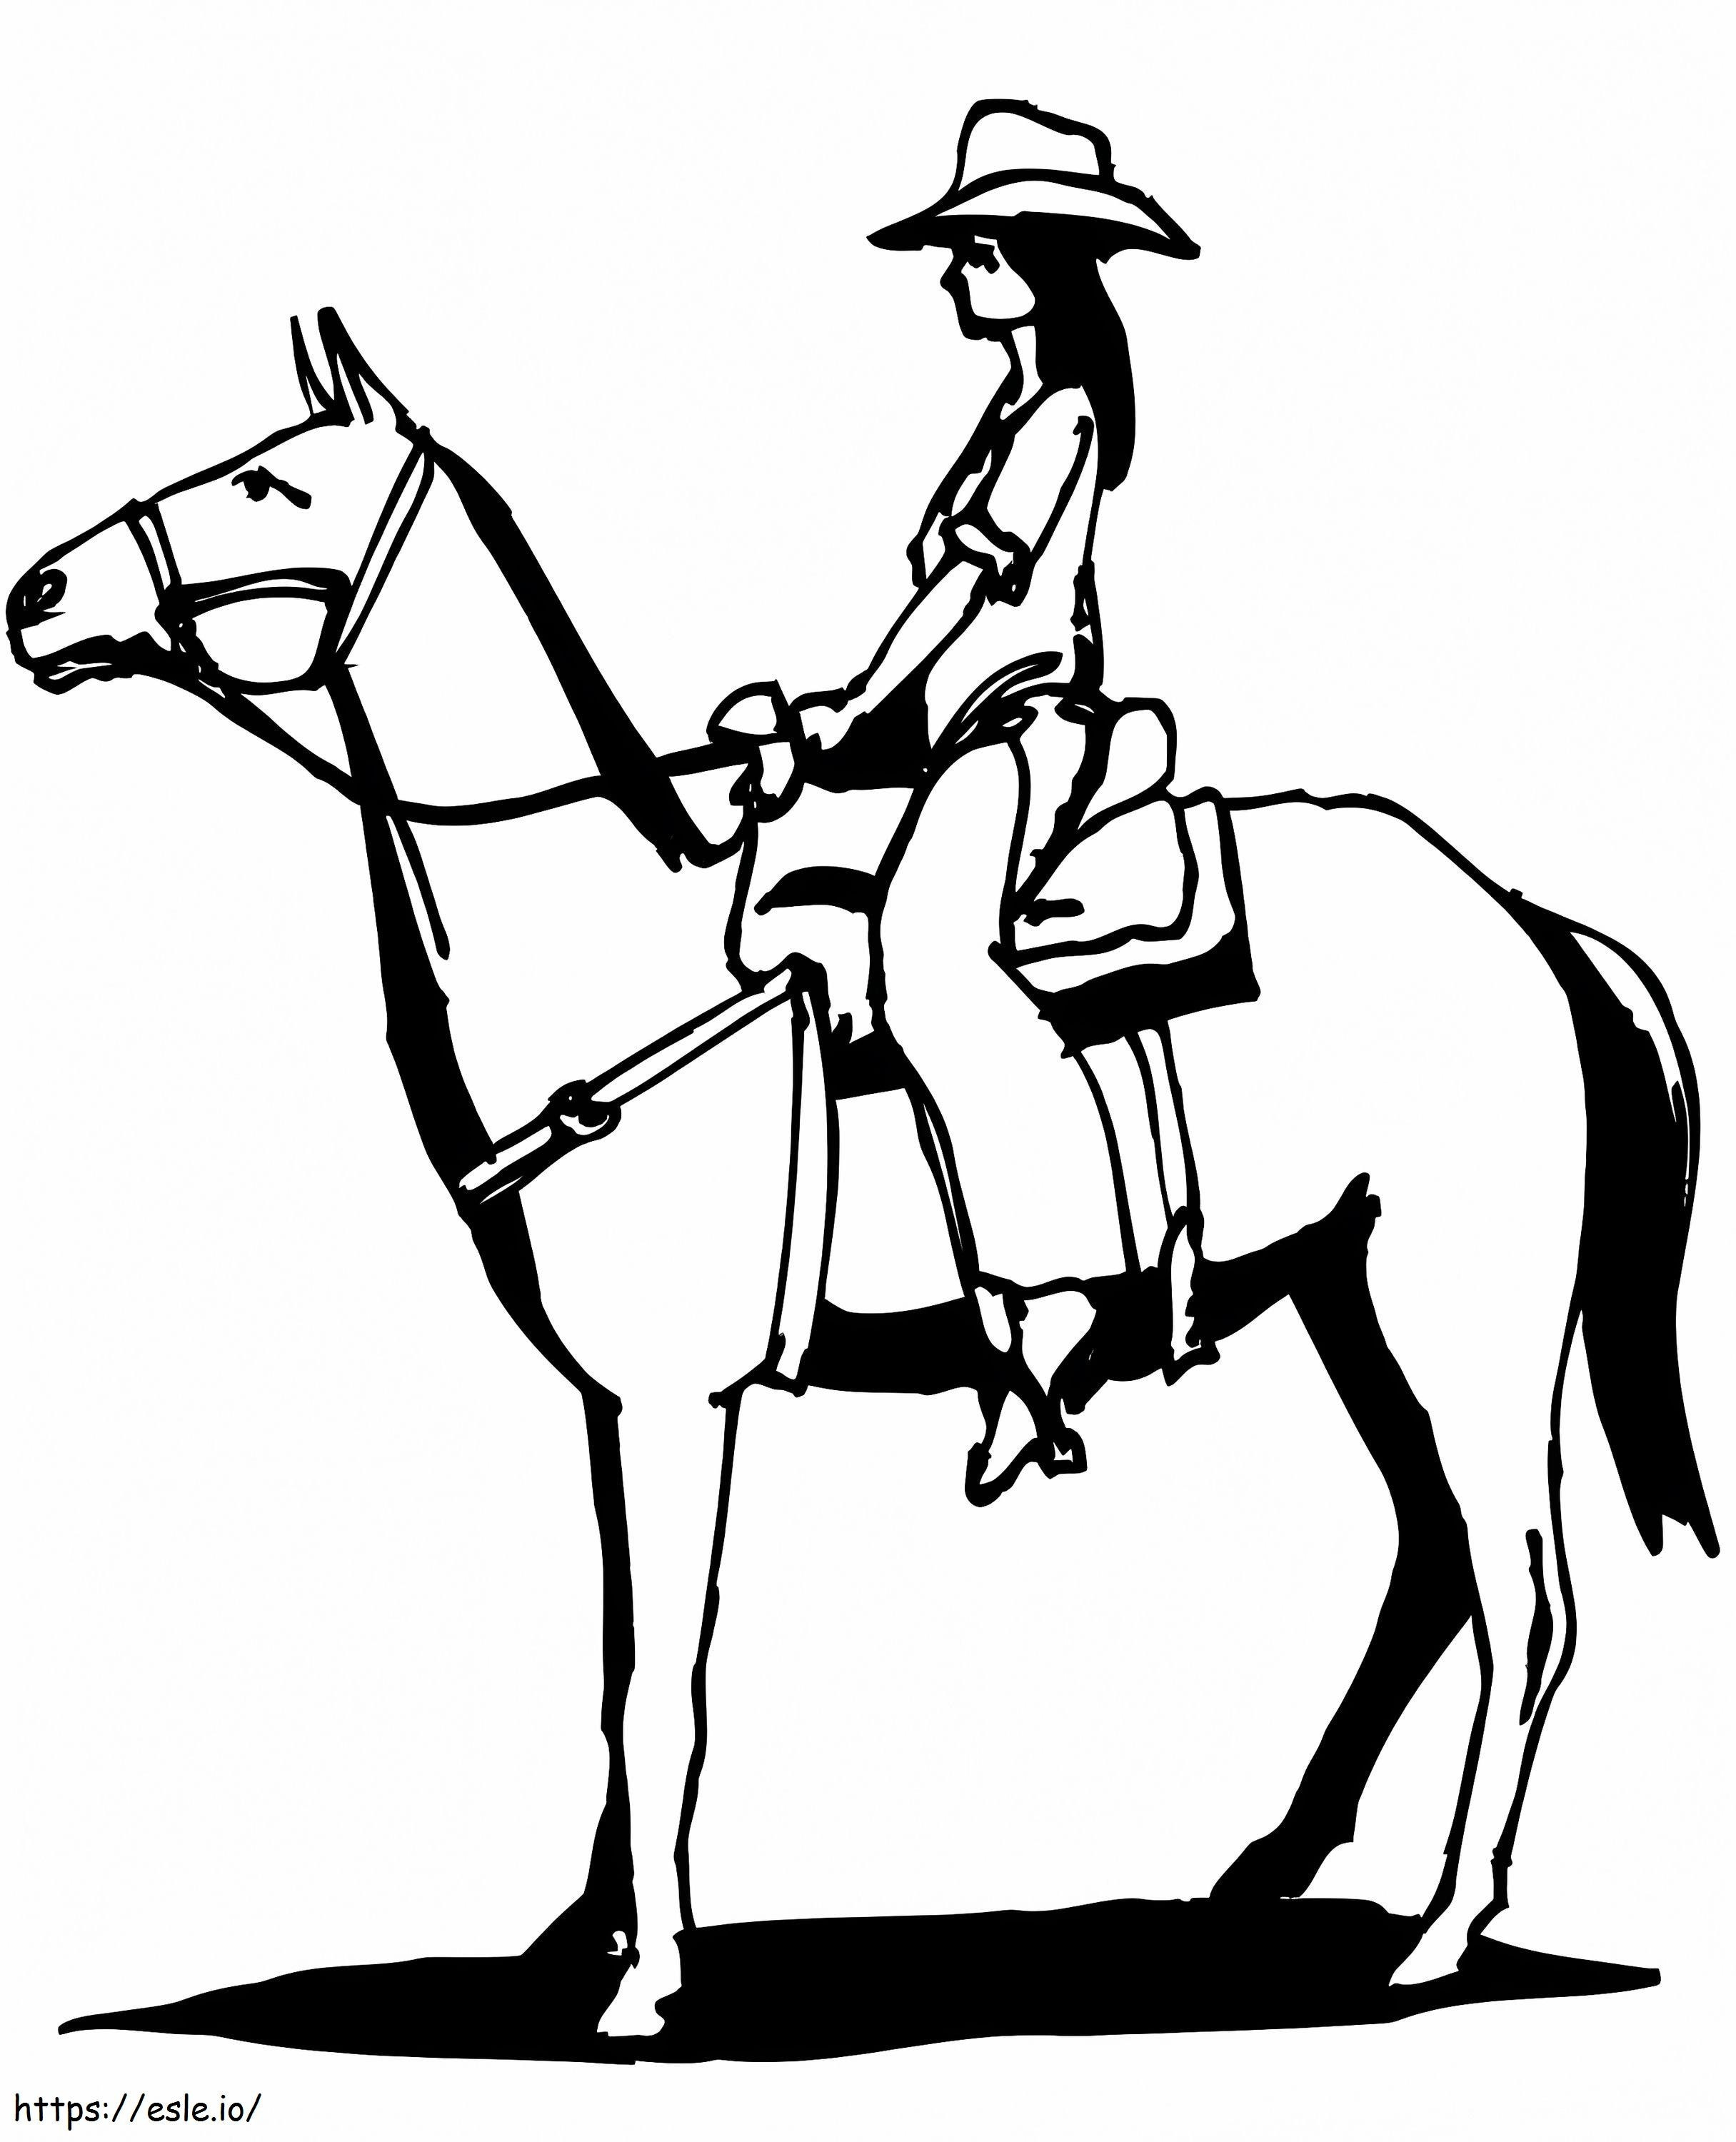 Cowgirl Riding Horse coloring page